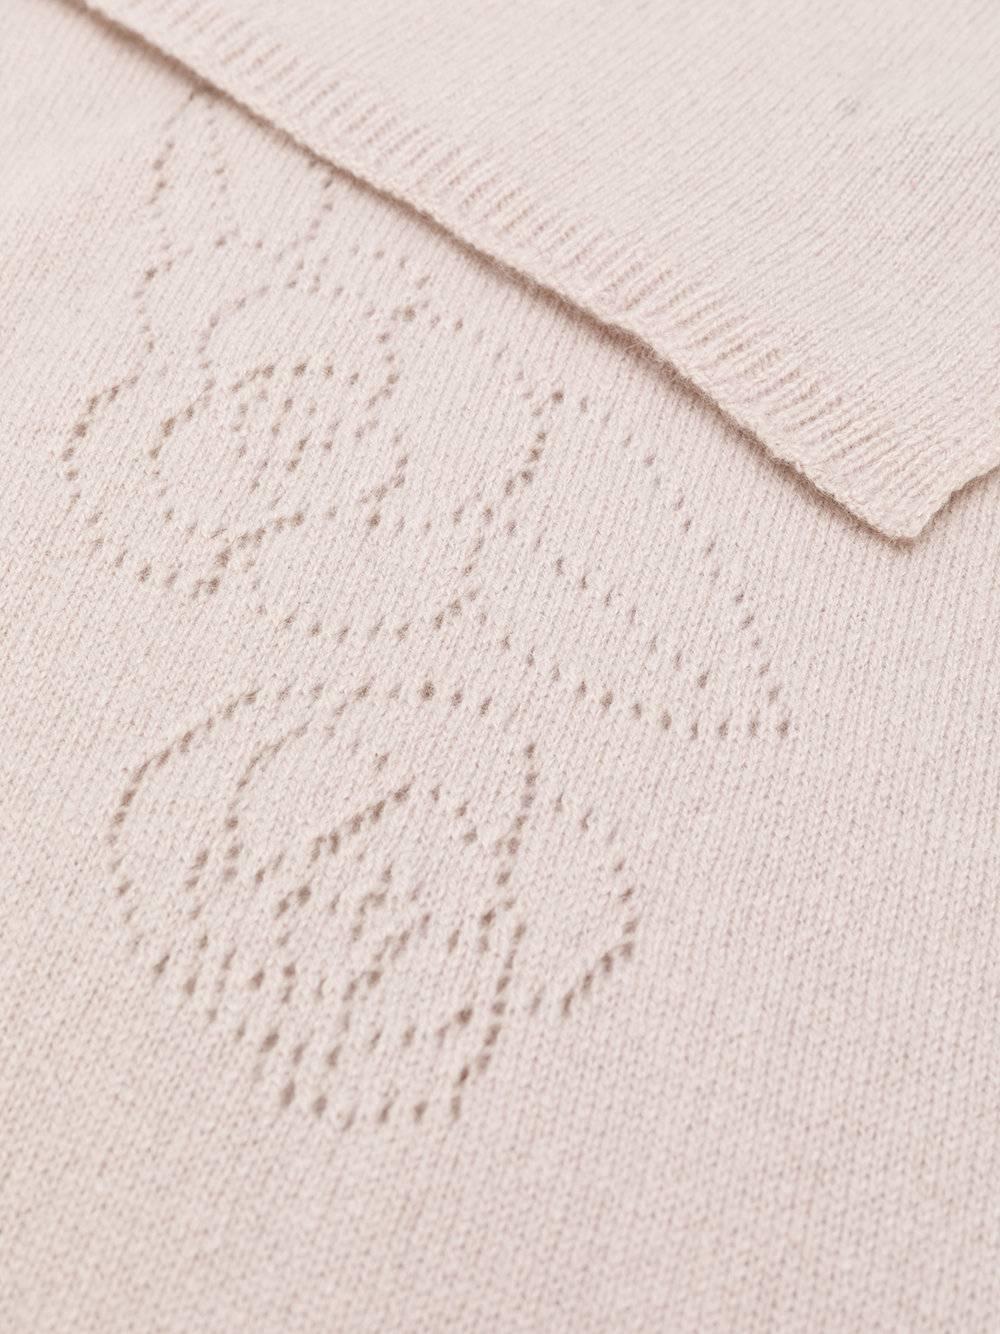 Crafted from a beautifully feminine dusty pink cashmere, this logo scarf features a cable knit, finished with a beaded signature interlocking logo.  

Colour: Dusty Pink

Composition: 100% Cashmere

Dimensions: 206cm x 45cm

Condition: 9/10